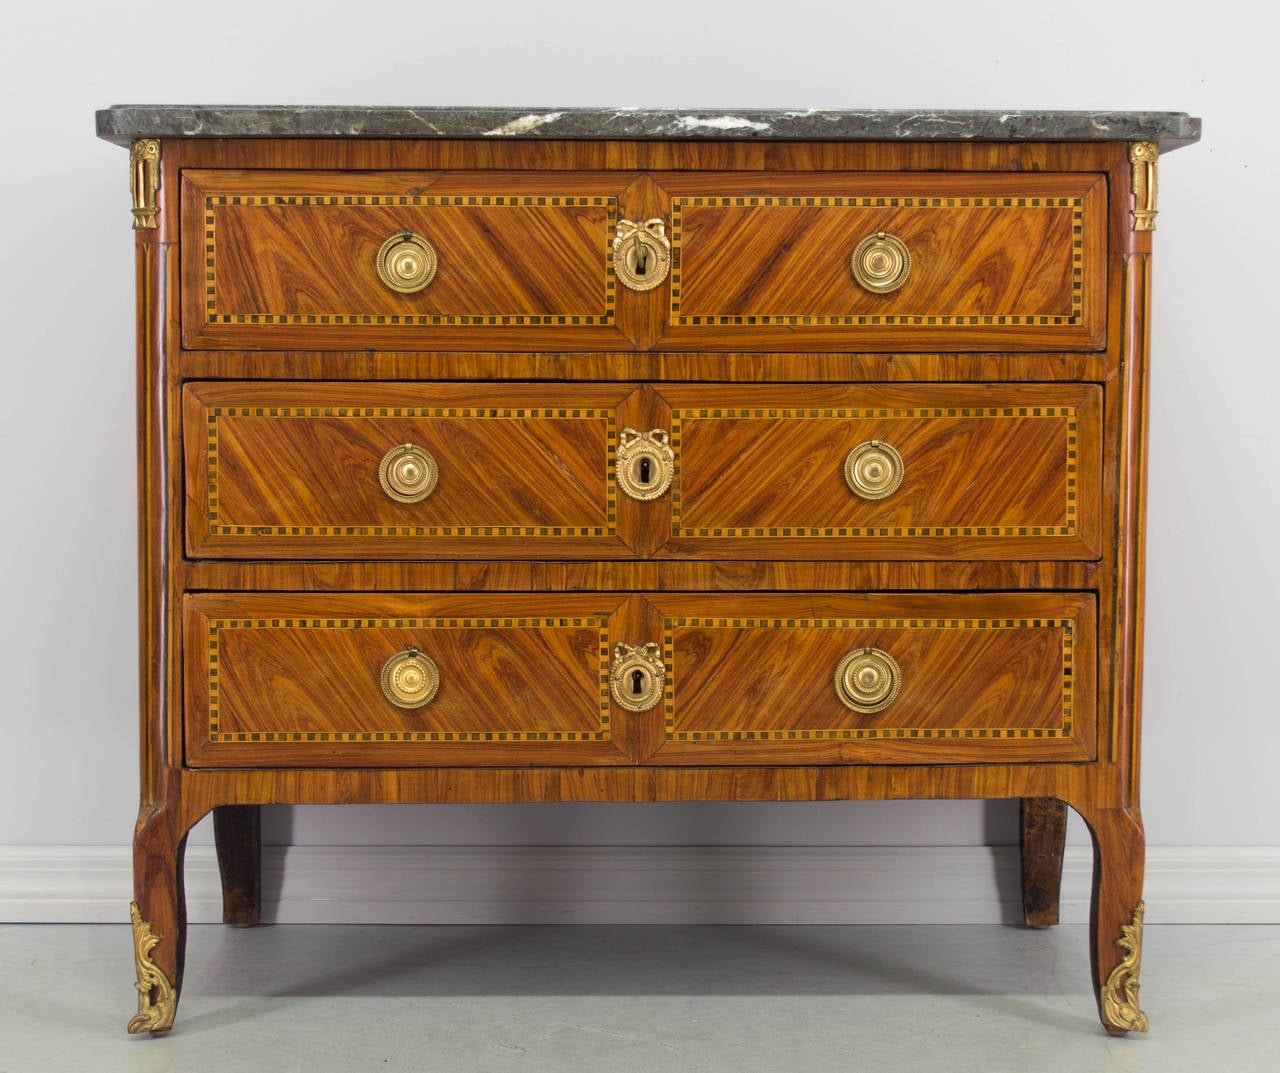 18th century Louis XVI marquetry commode or chest of drawers with tulipwood inlay veneer and oak and pine as secondary wood. Nice proportions and expert craftsmanship with vertical striped inlay on the curved front corners. Three dovetailed drawers